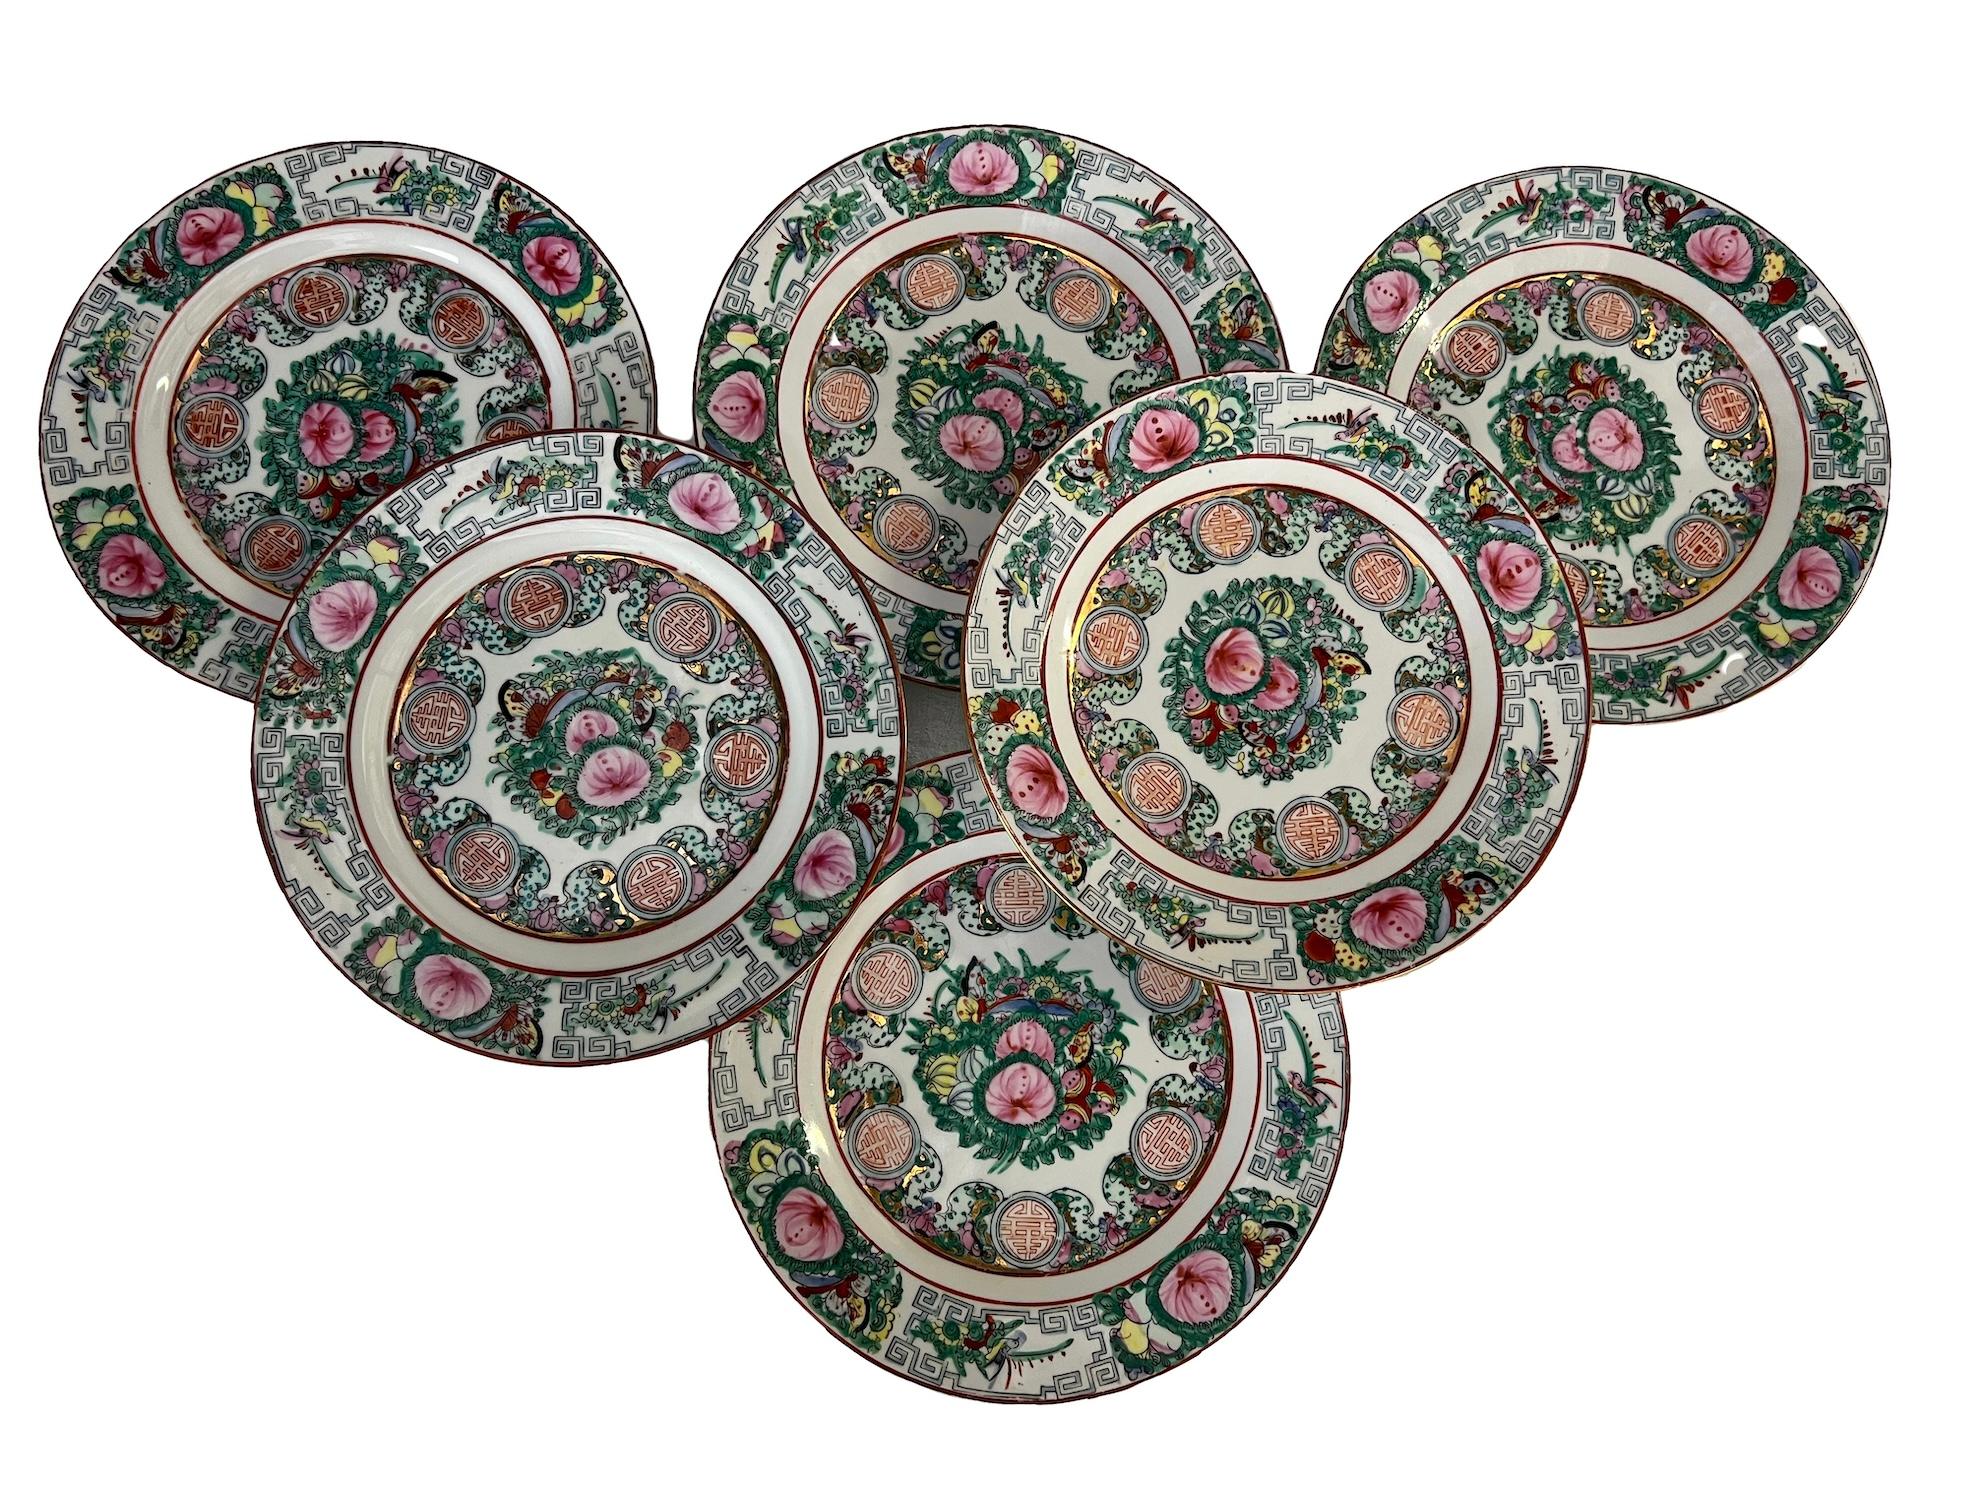 Set of 6 Chinese porcelain dessert plates. These Guang Cai plates, also known as 'three-color plates' or 'family rose plates' in Chinese, are a type of Chinese porcelain known for its vibrant color palette and intricate decoration. These plates are